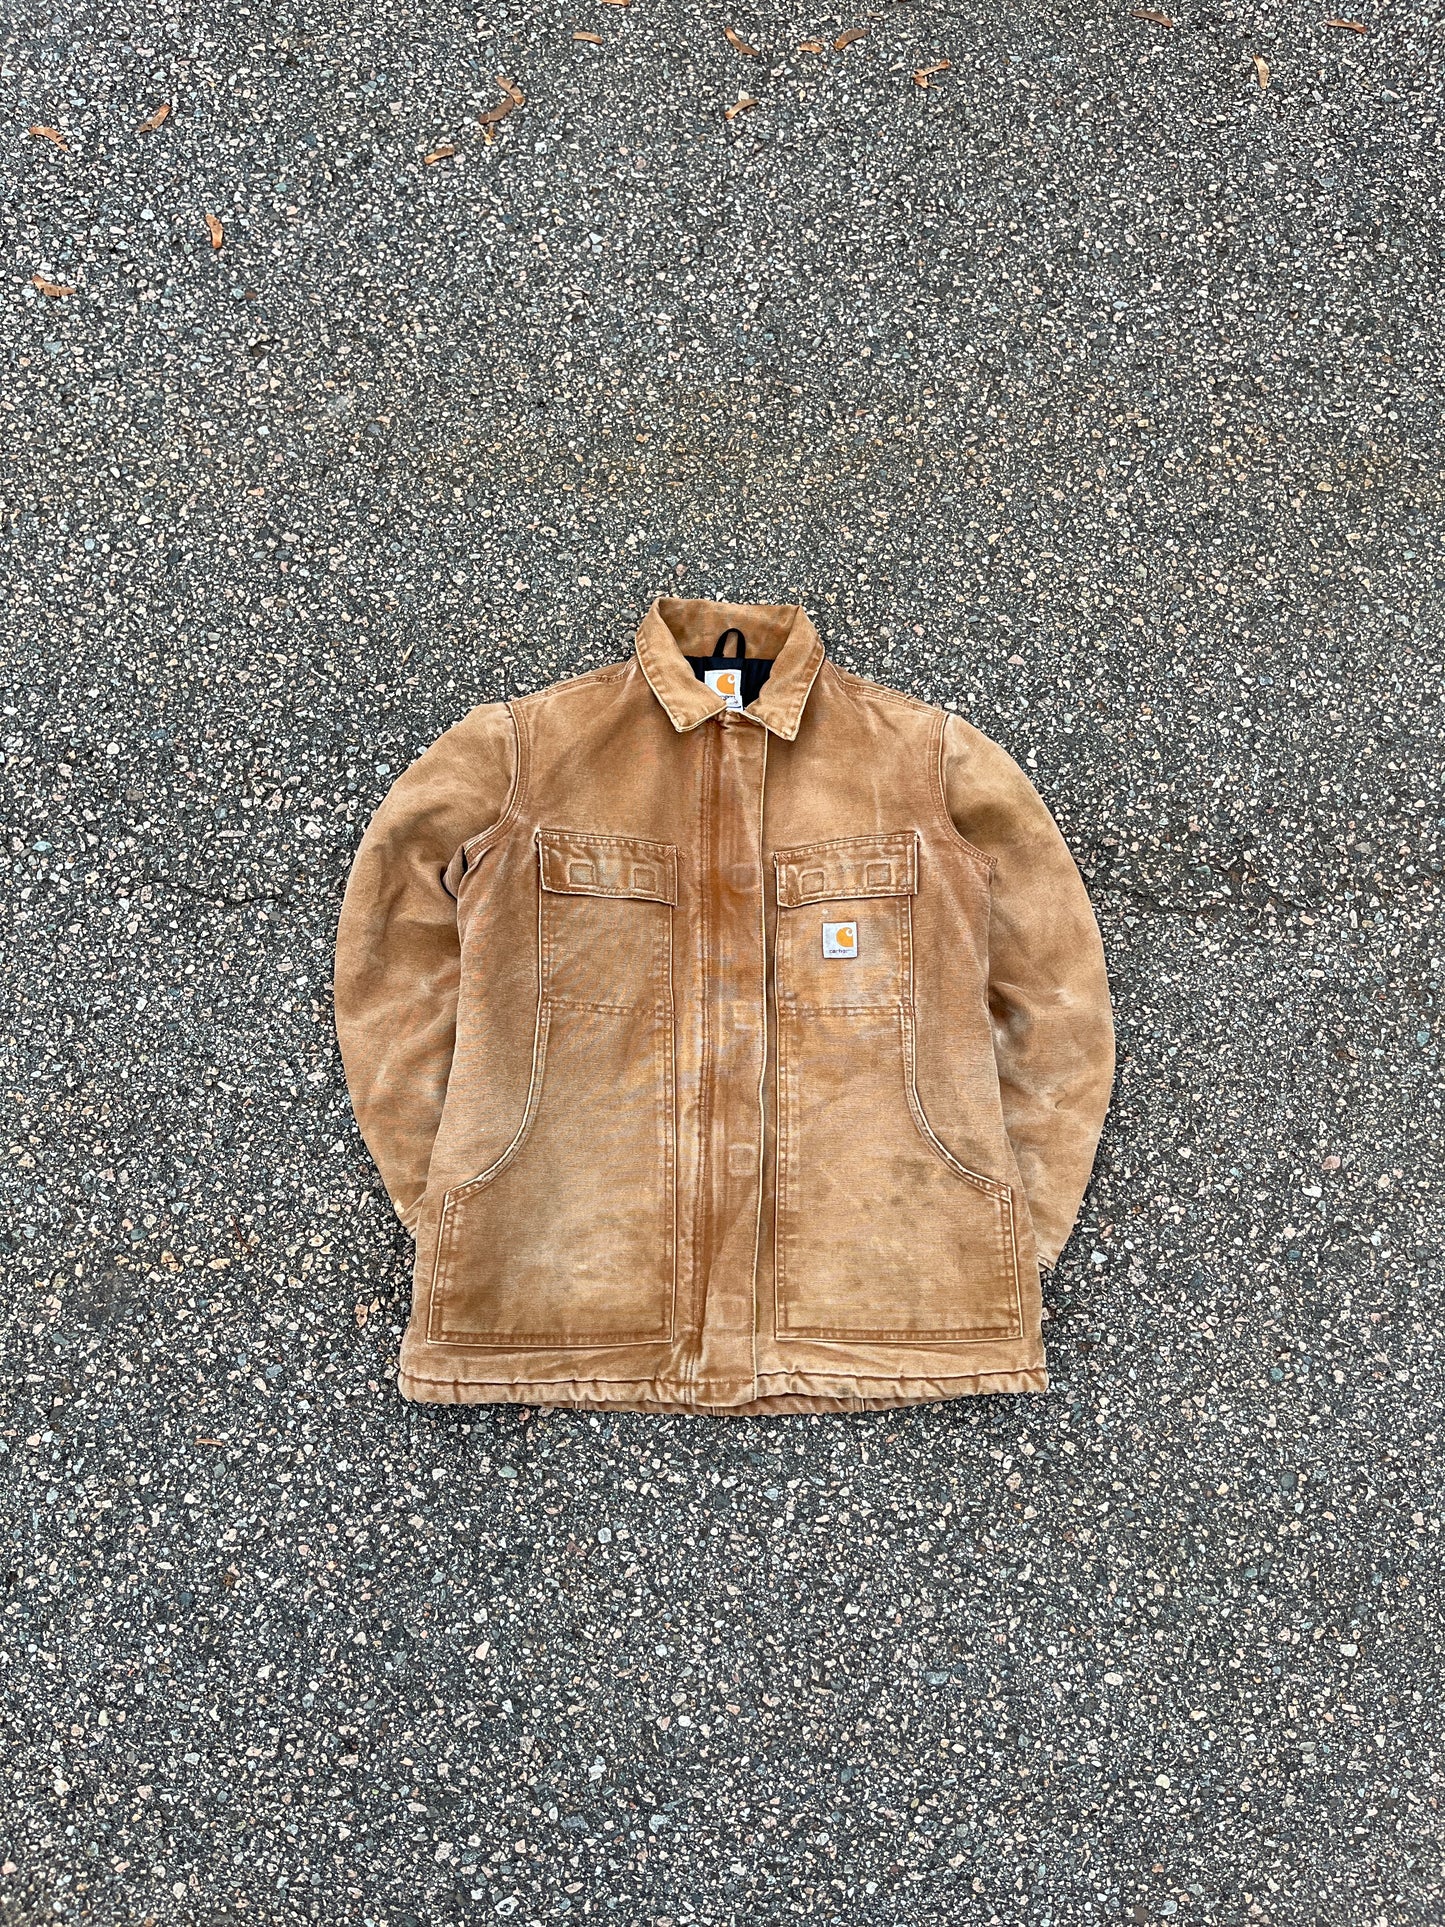 Faded Brown Carhartt Arctic Style Jacket - Small